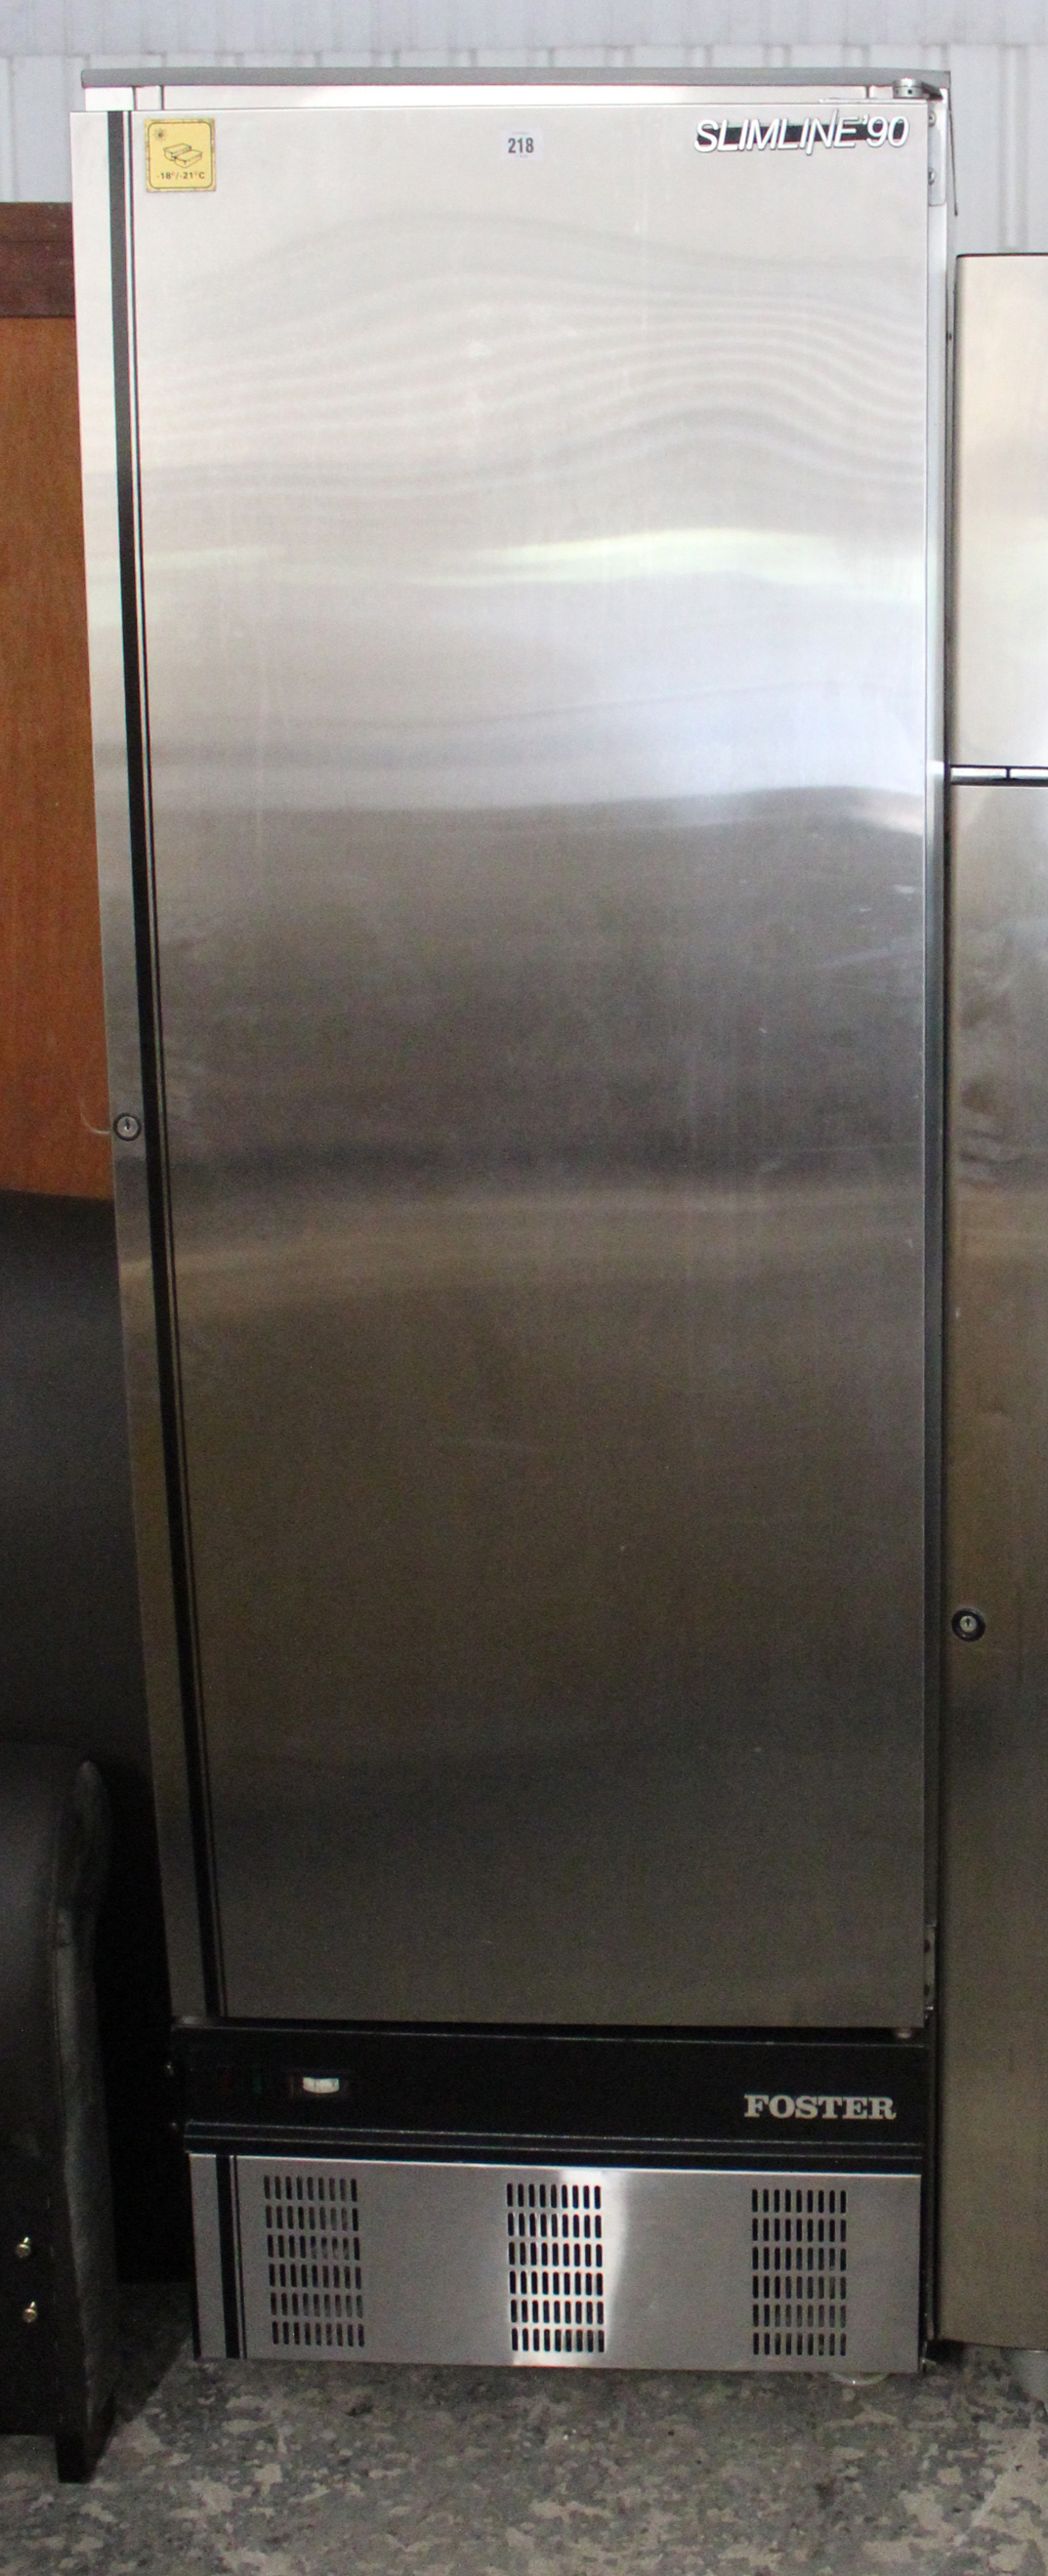 A Foster “Slimline 90” tall catering grade chiller cabinet refrigerator in silvered finish case, - Image 4 of 5